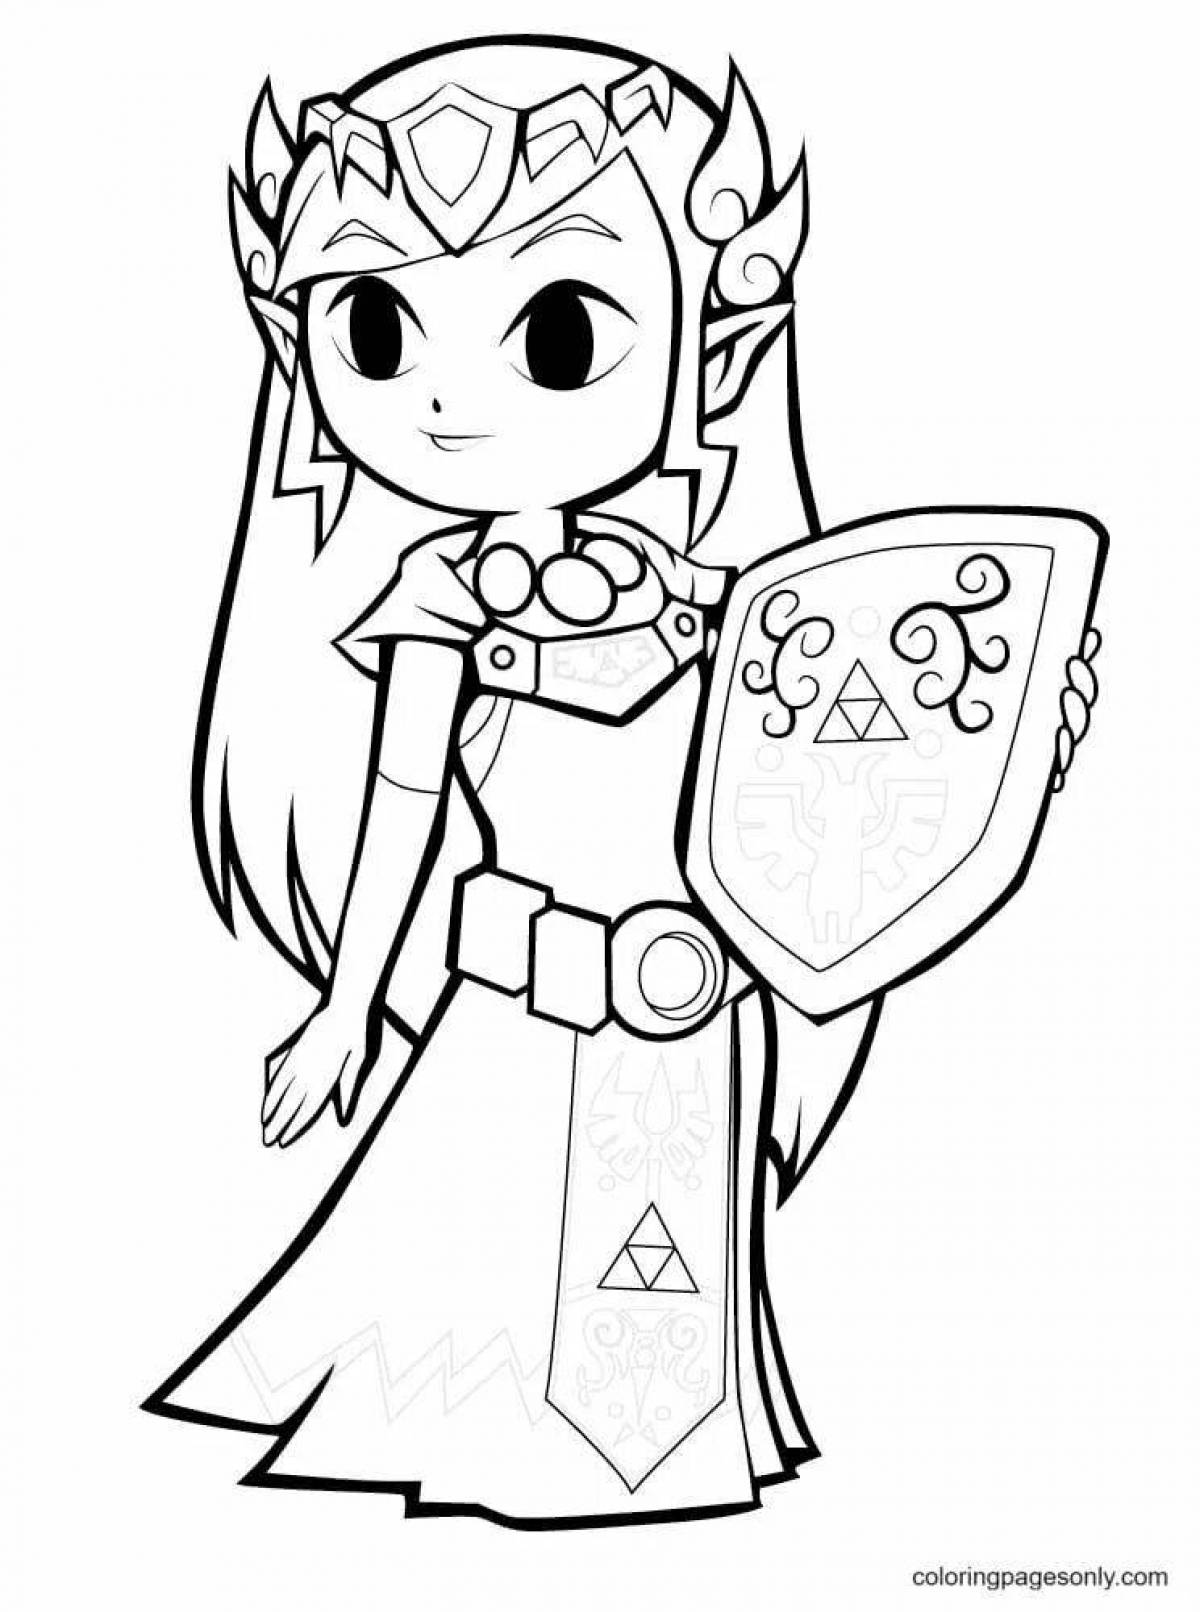 Exalted zelda coloring page